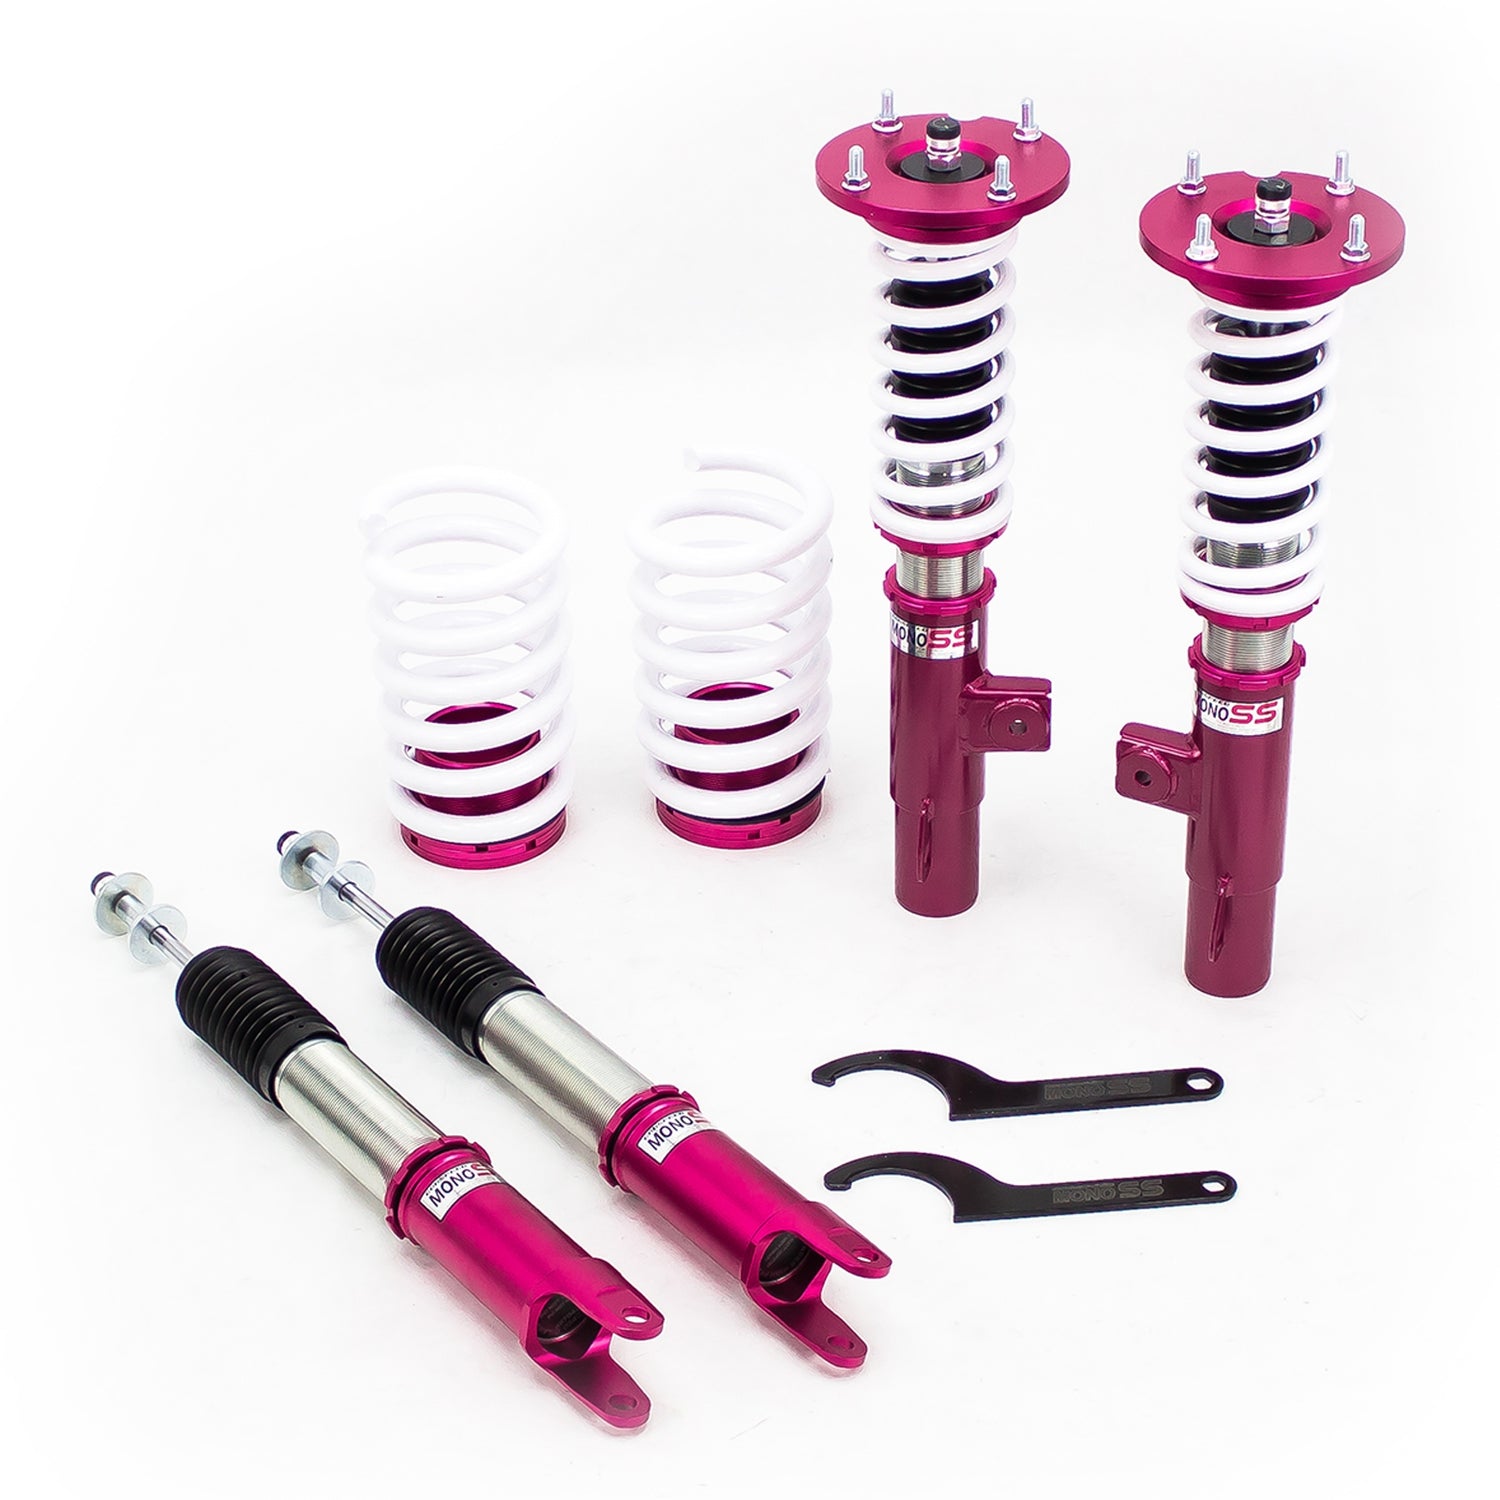 Godspeed MSS0142-A MonoSS Coilover Lowering Kit, Fully Adjustable, Ride Height, Spring Tension And 16 Click Damping, Ford Taurus SHO 2010-17